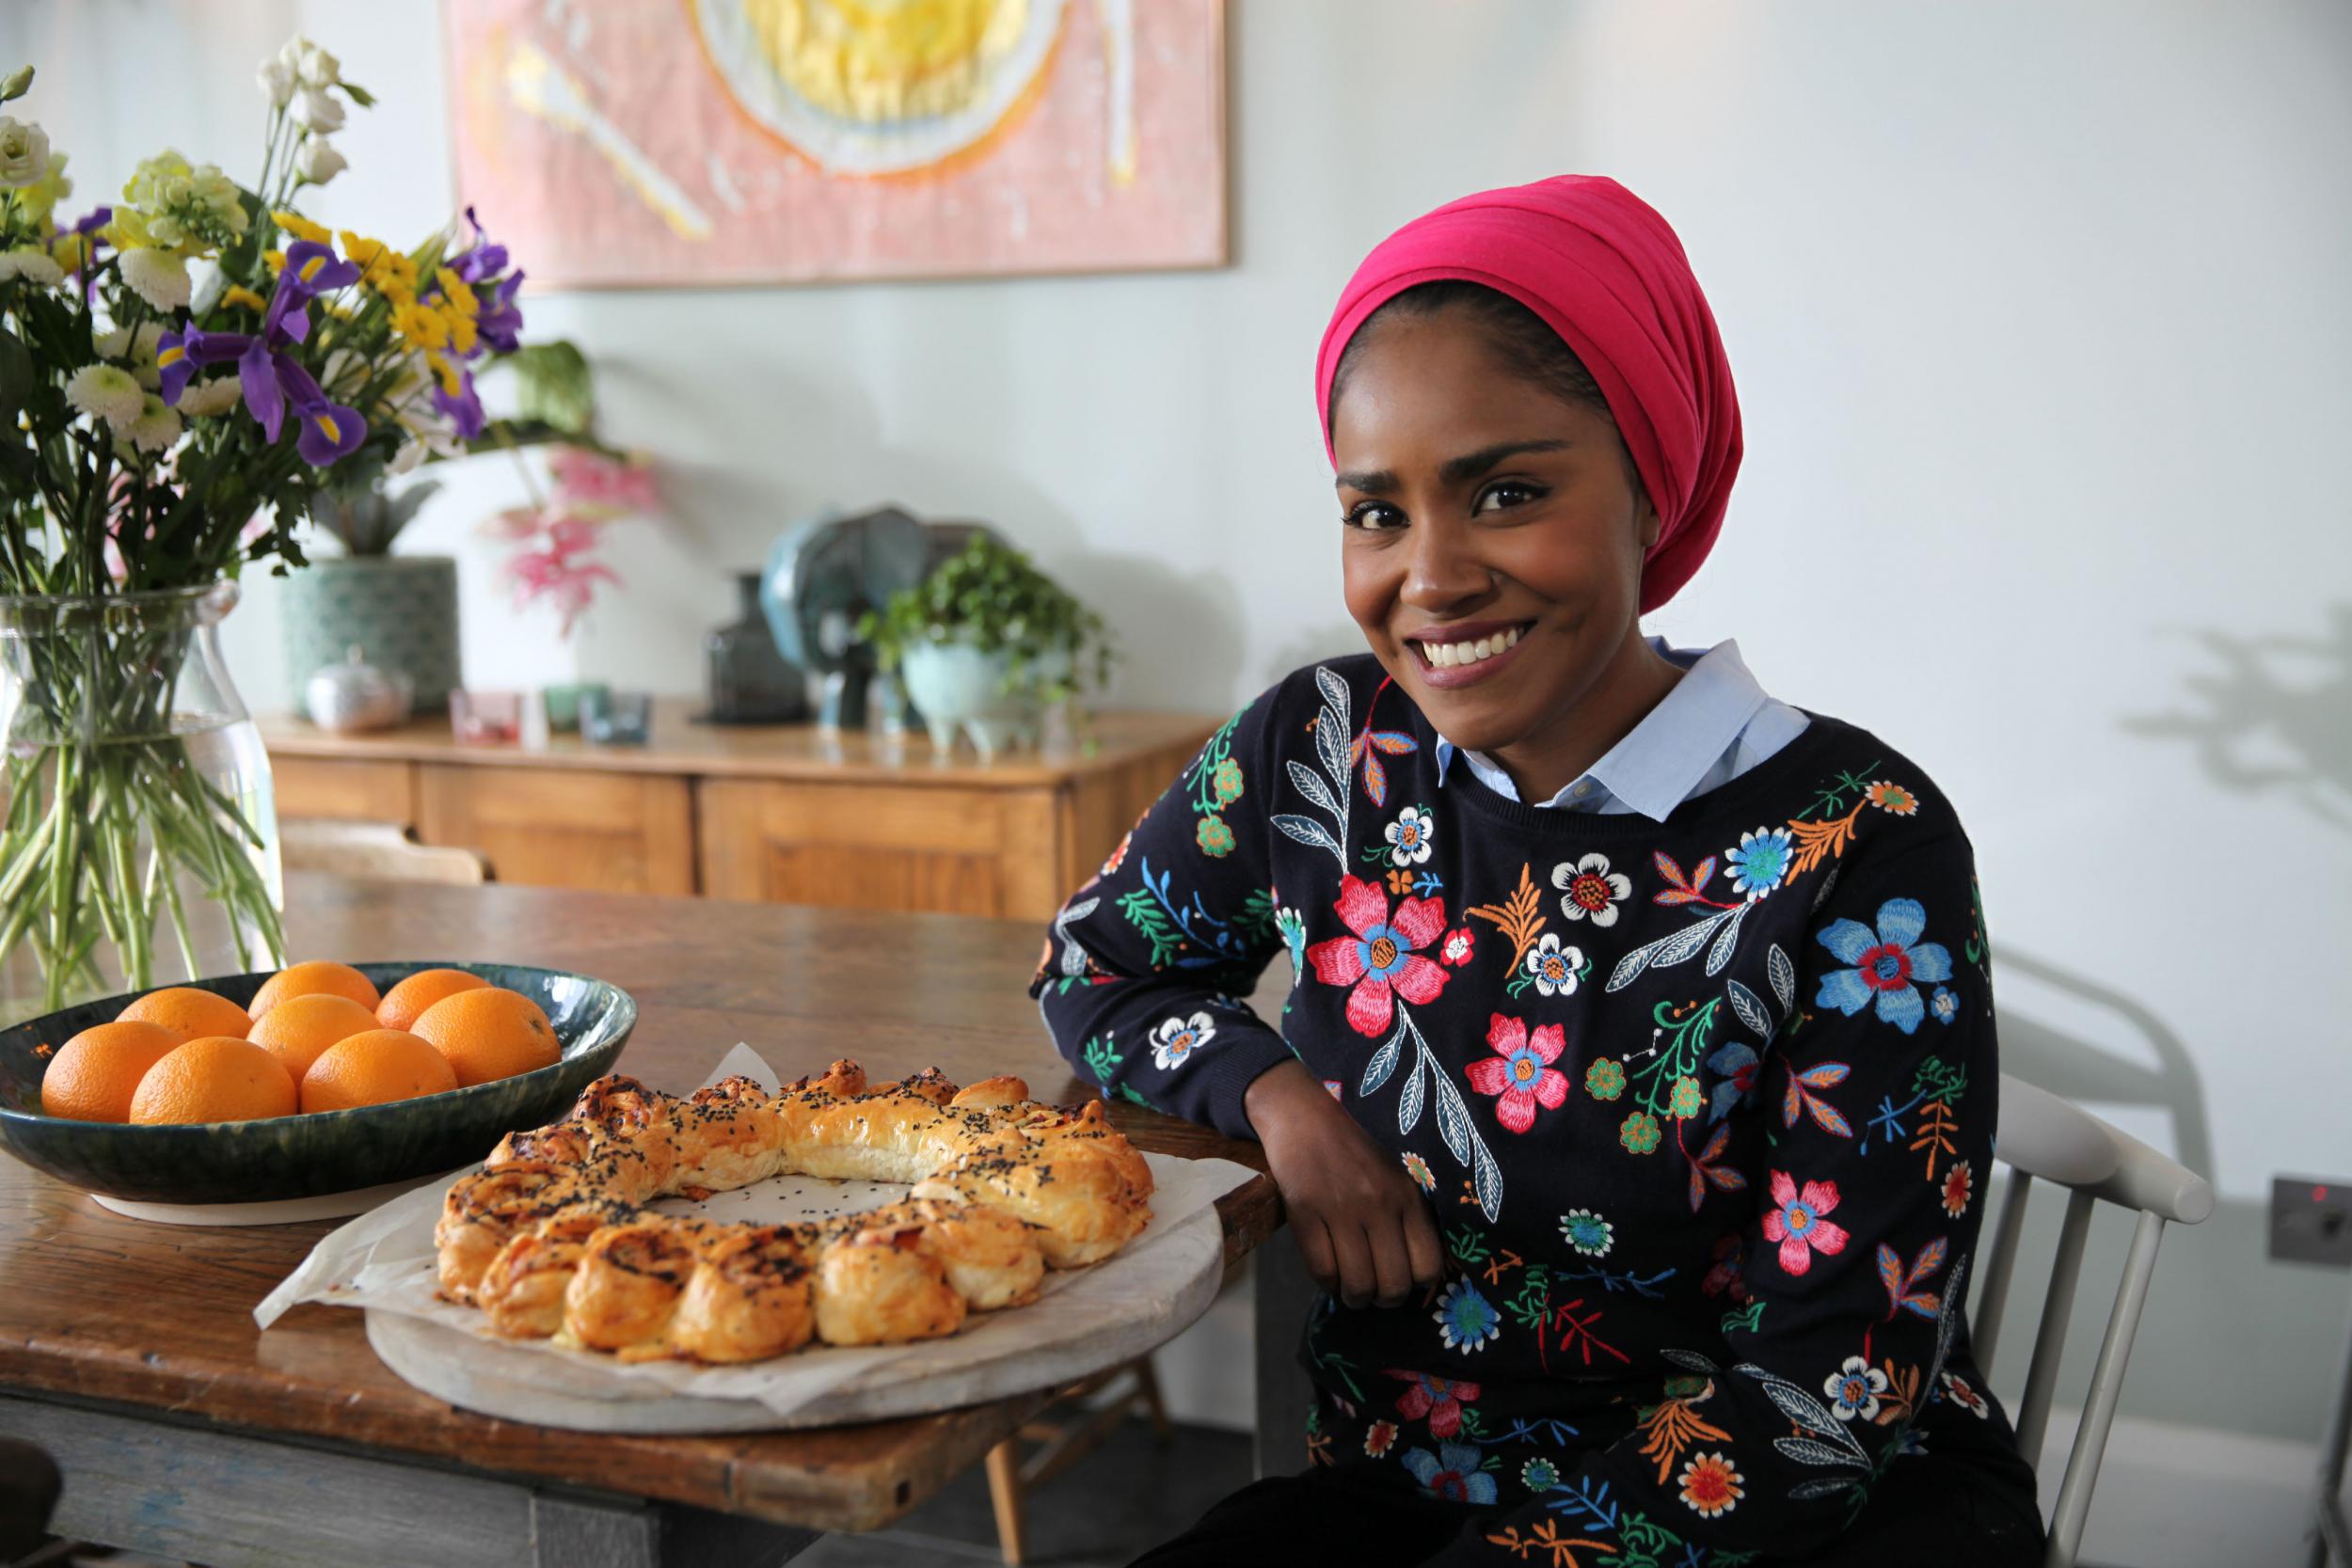 The 2015 ‘Great British Bake Off’ champion Nadiya Hussain keeps it in the family with her new series